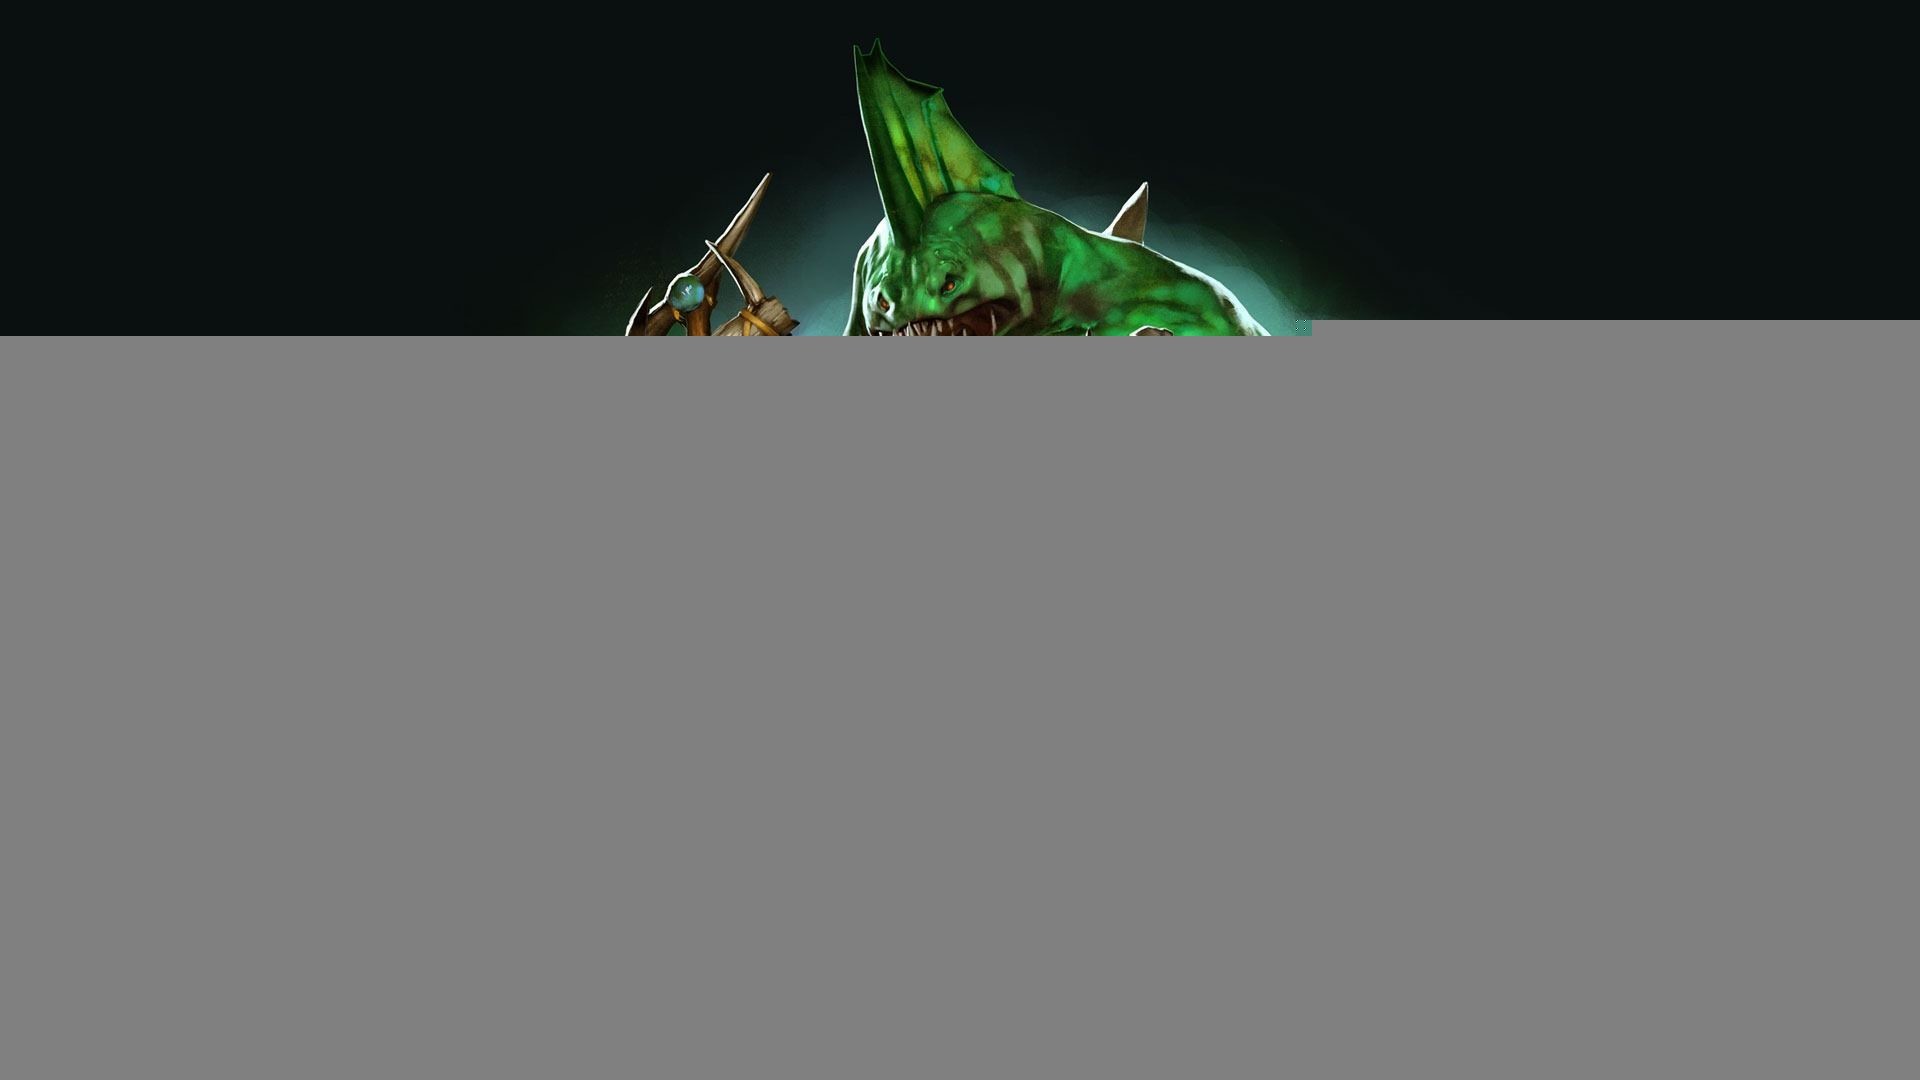 dota background twitter 2015 – Defense of The Ancients Games